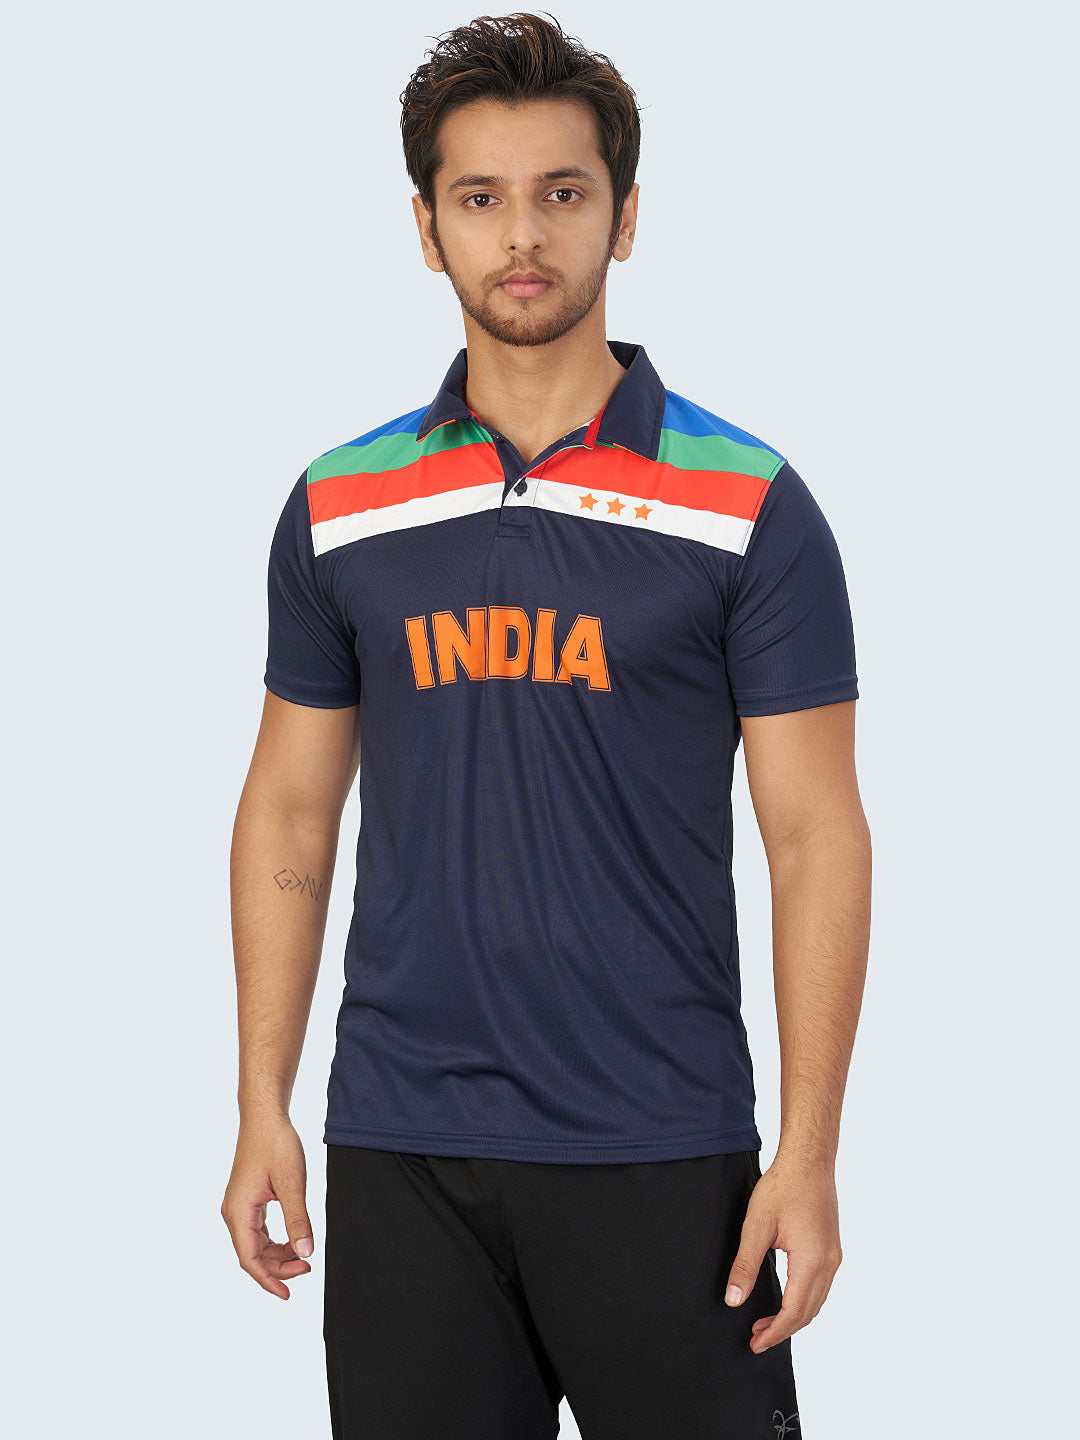 Fanqvest 1992 Cricket World Cup Team India Retro Fan Jersey Sports Polo Shirt